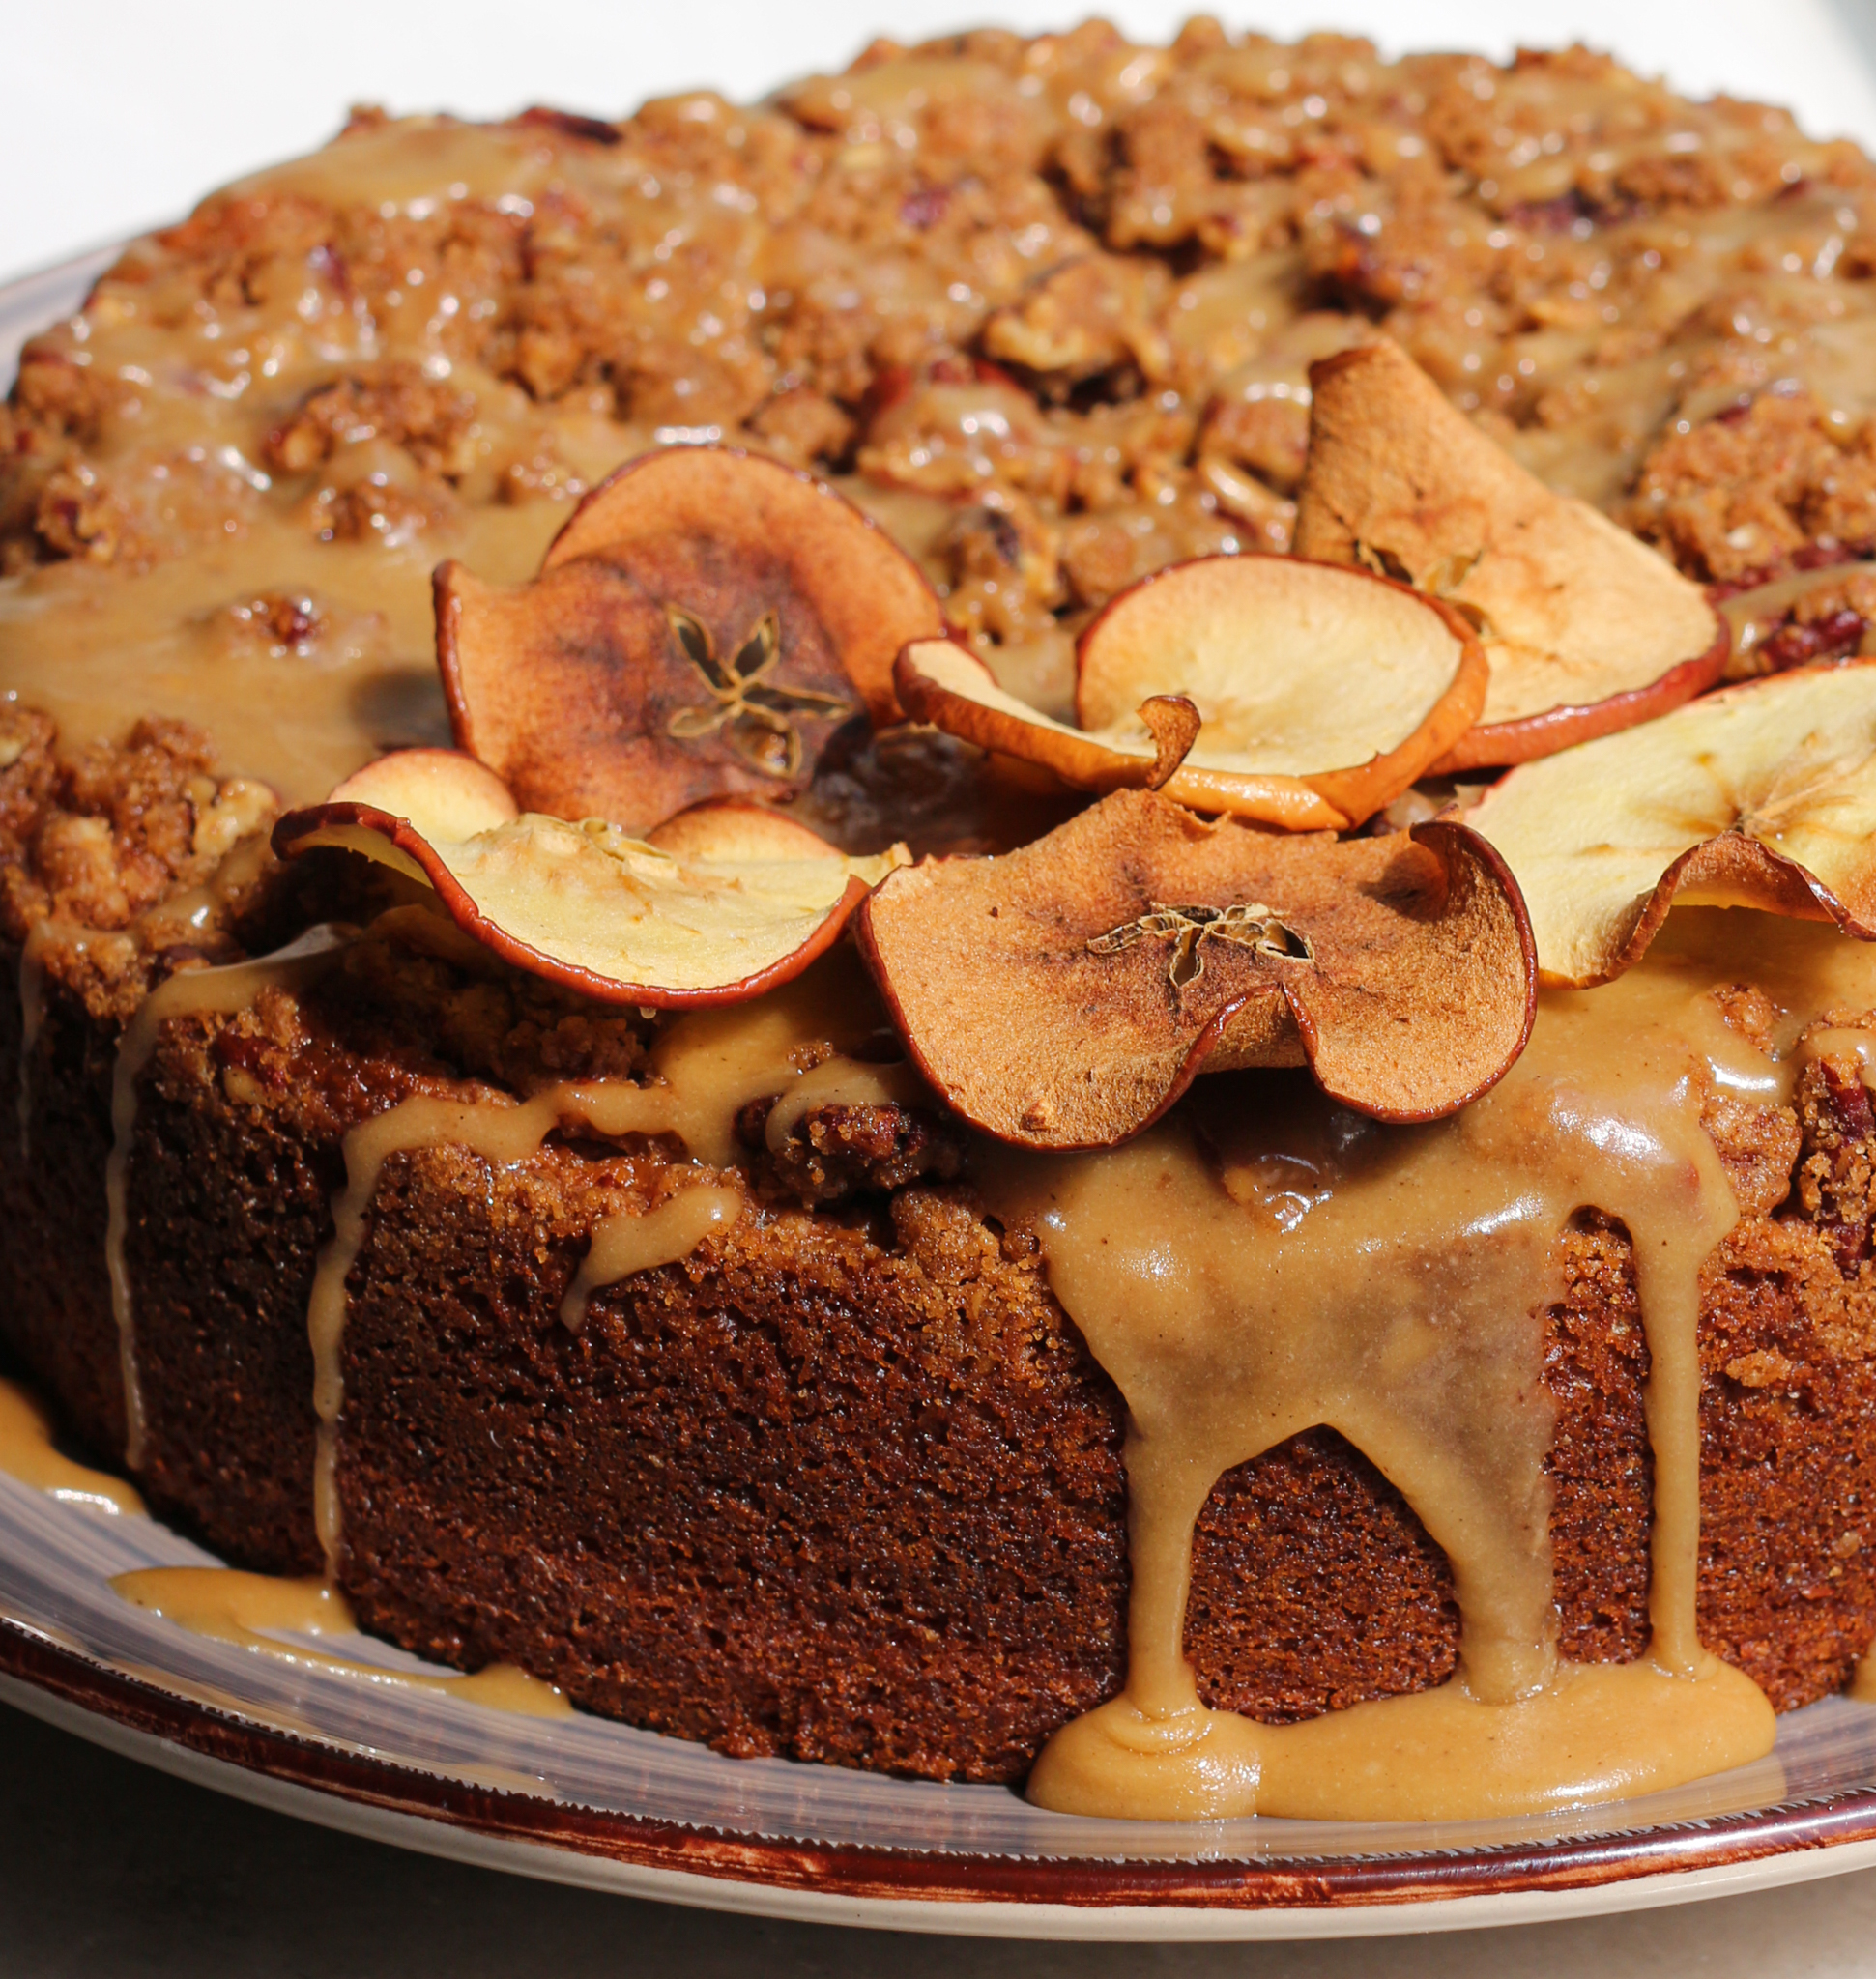 Spiced Pecan Streusel Cake with a Toffee Glaze